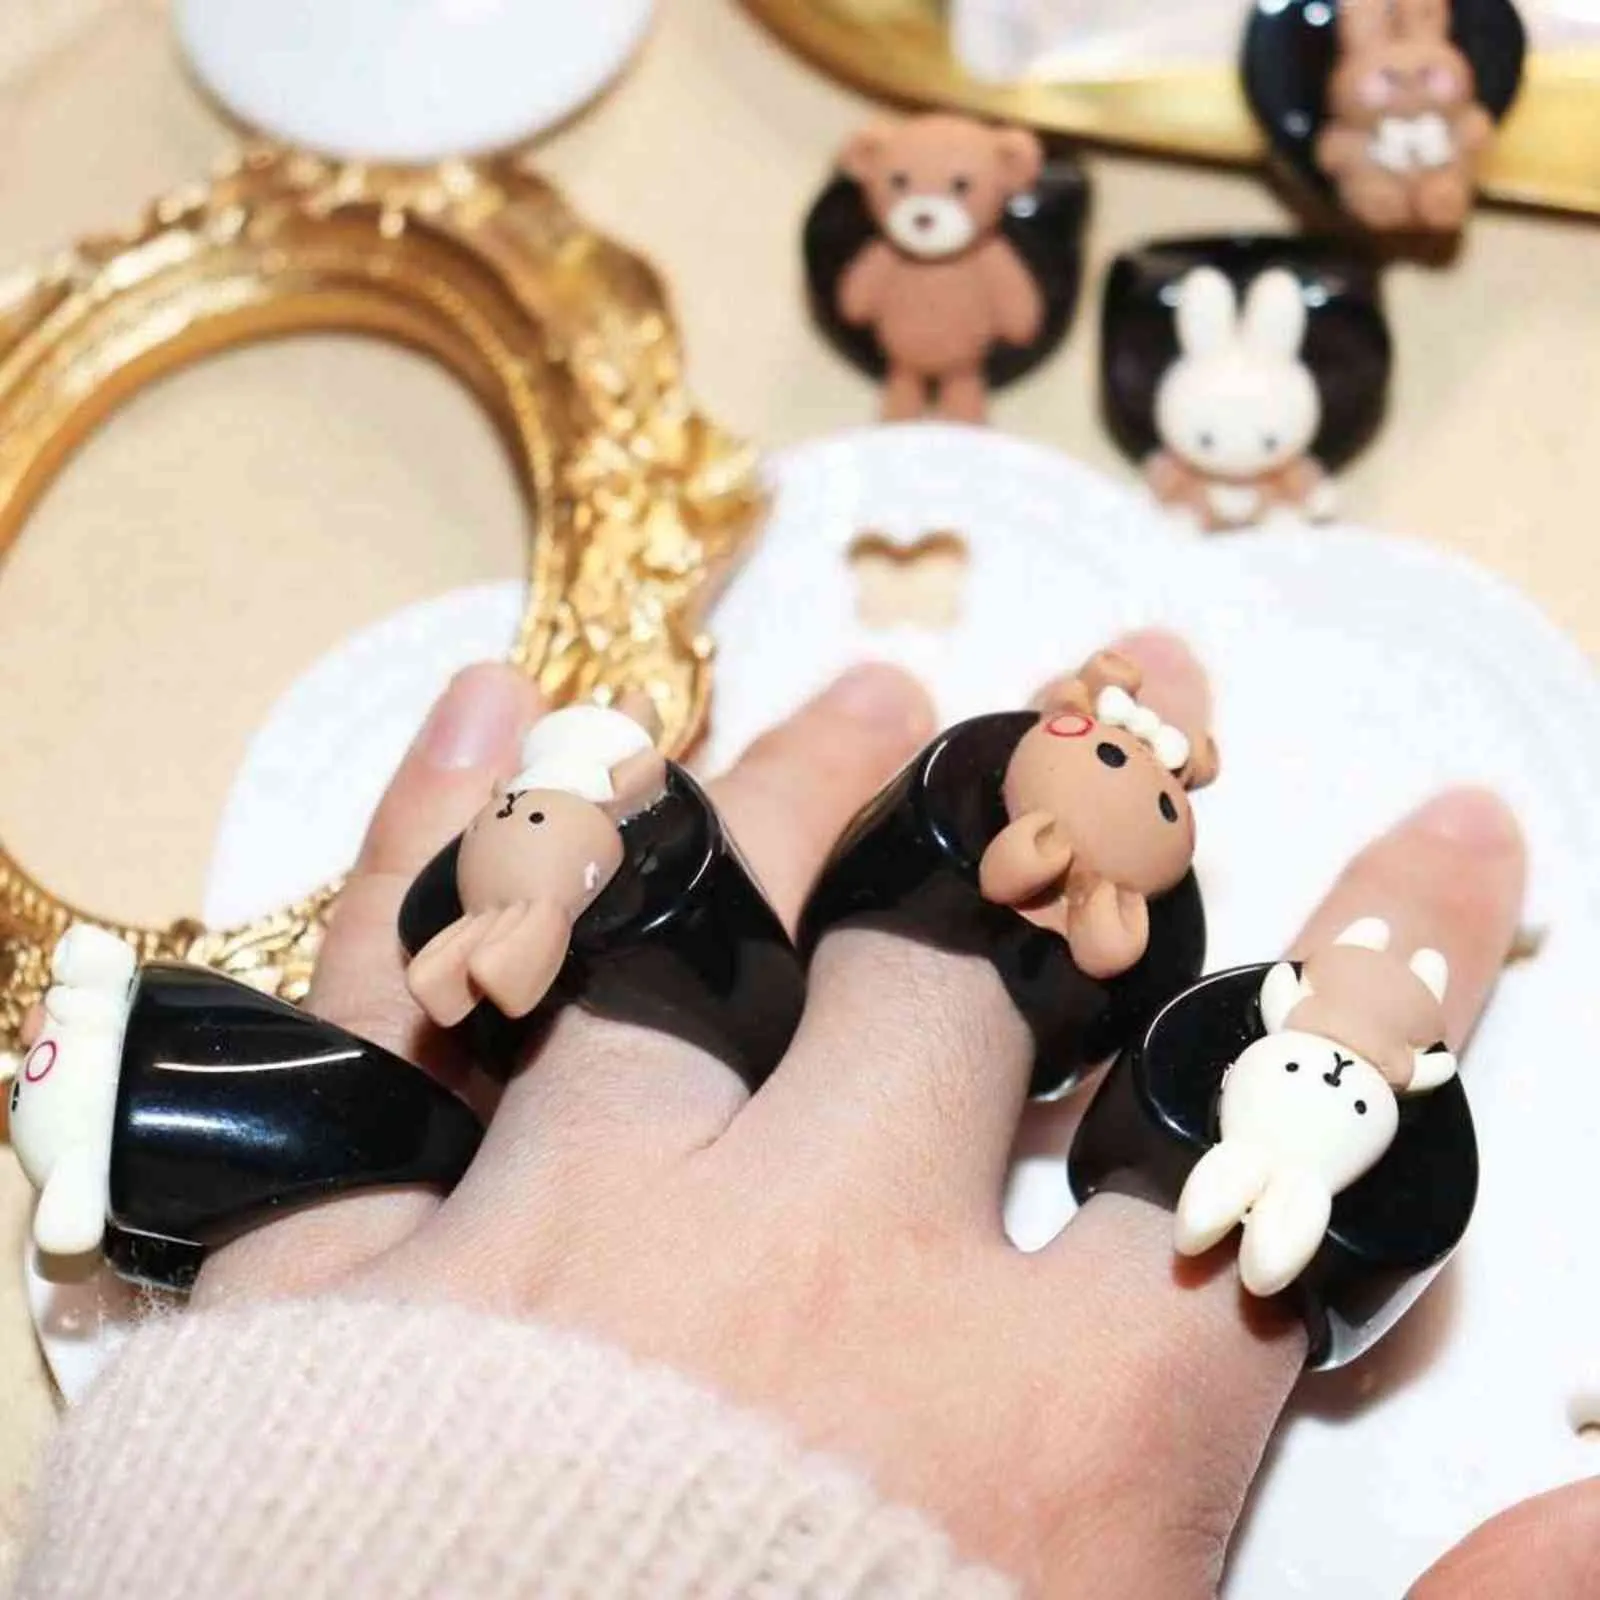 New Funny Cute Colorful Acrylic Resin Ring Cartoon Exaggerated Character Avatar Finger Rings Women Girls Party Jewelry Gifts G1125